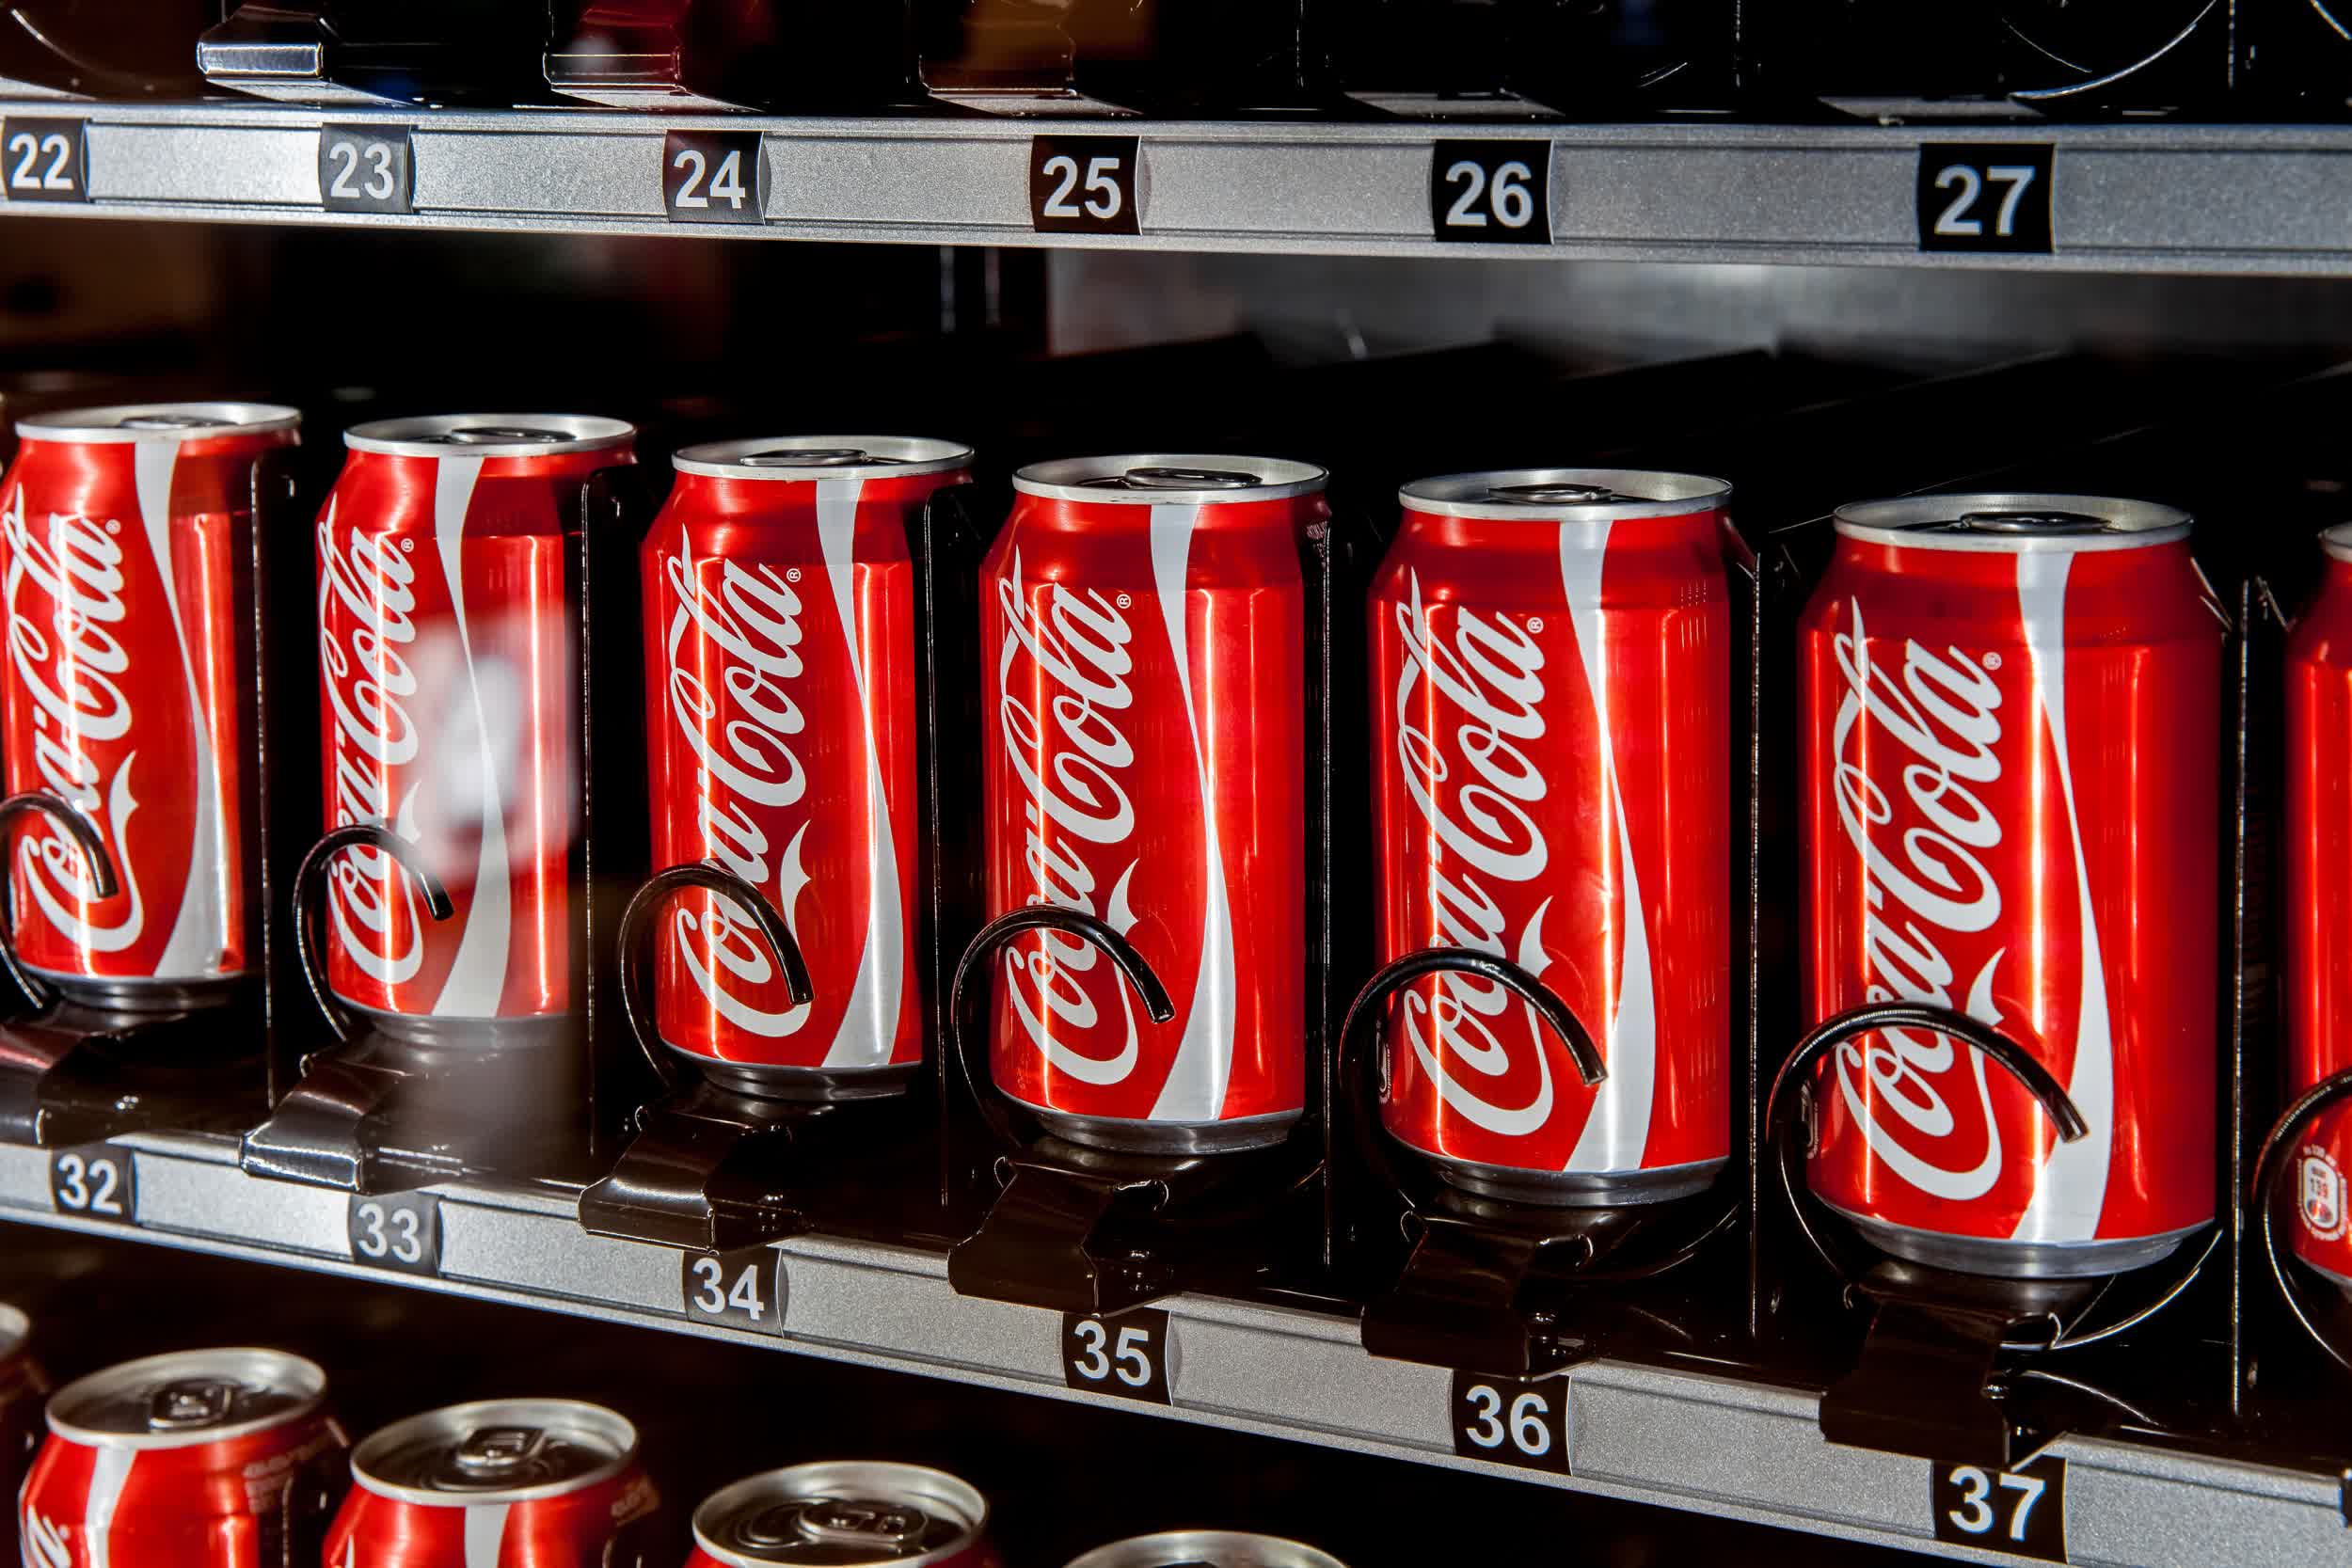 Coca-Cola is testing vending machine subscriptions in Japan